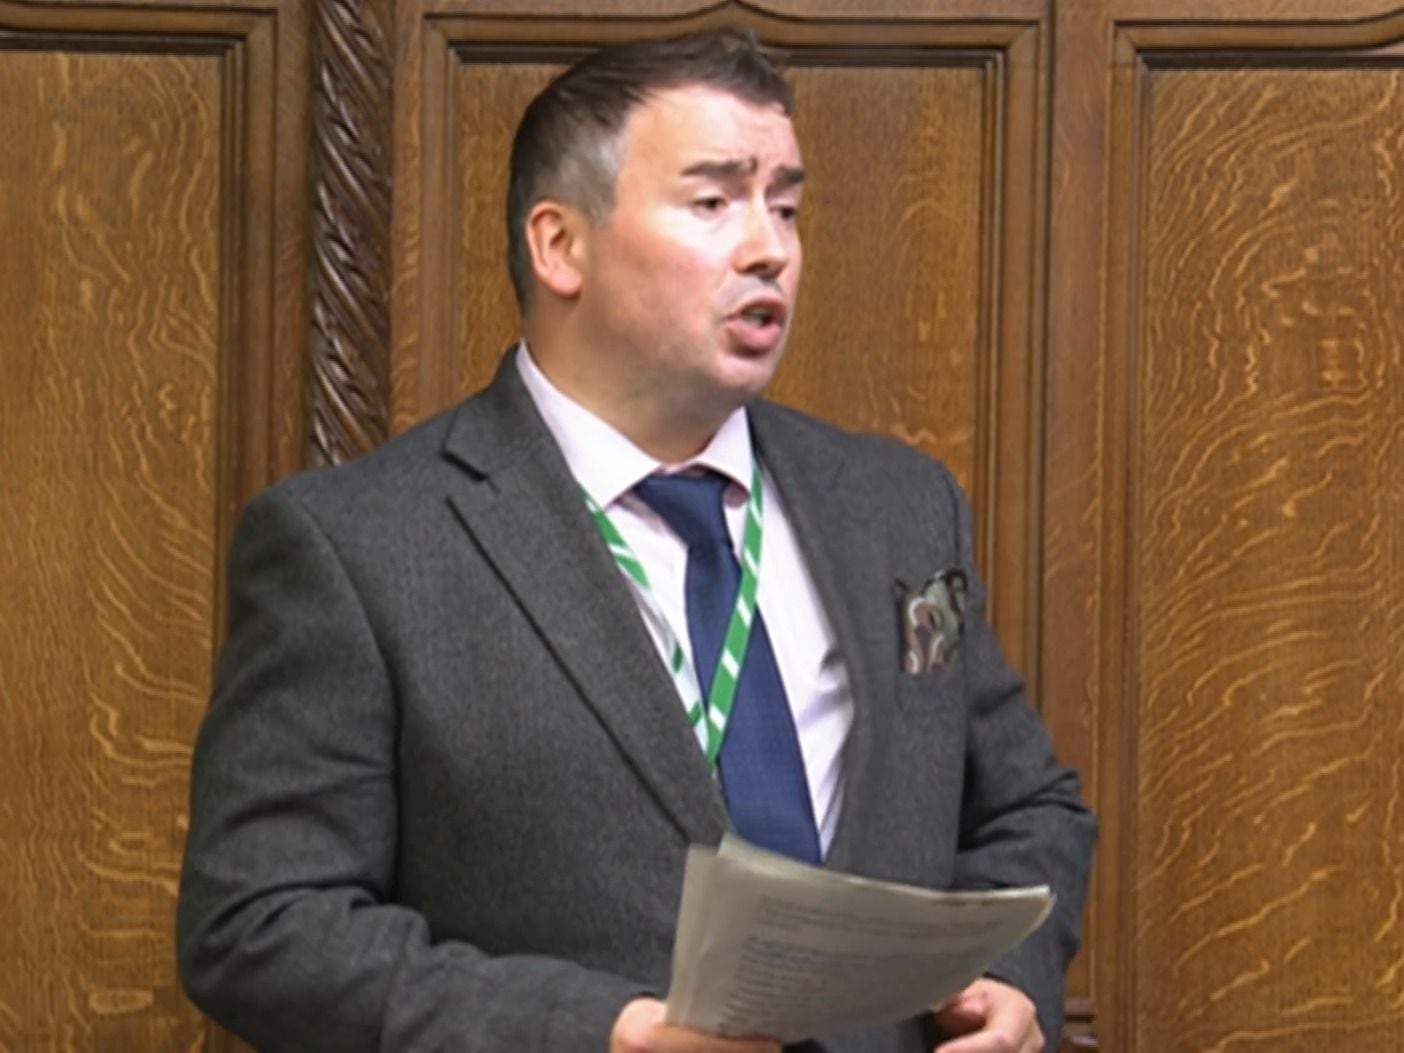 MP dedicates maiden Commons speech to late mother who ‘never gave up on me’